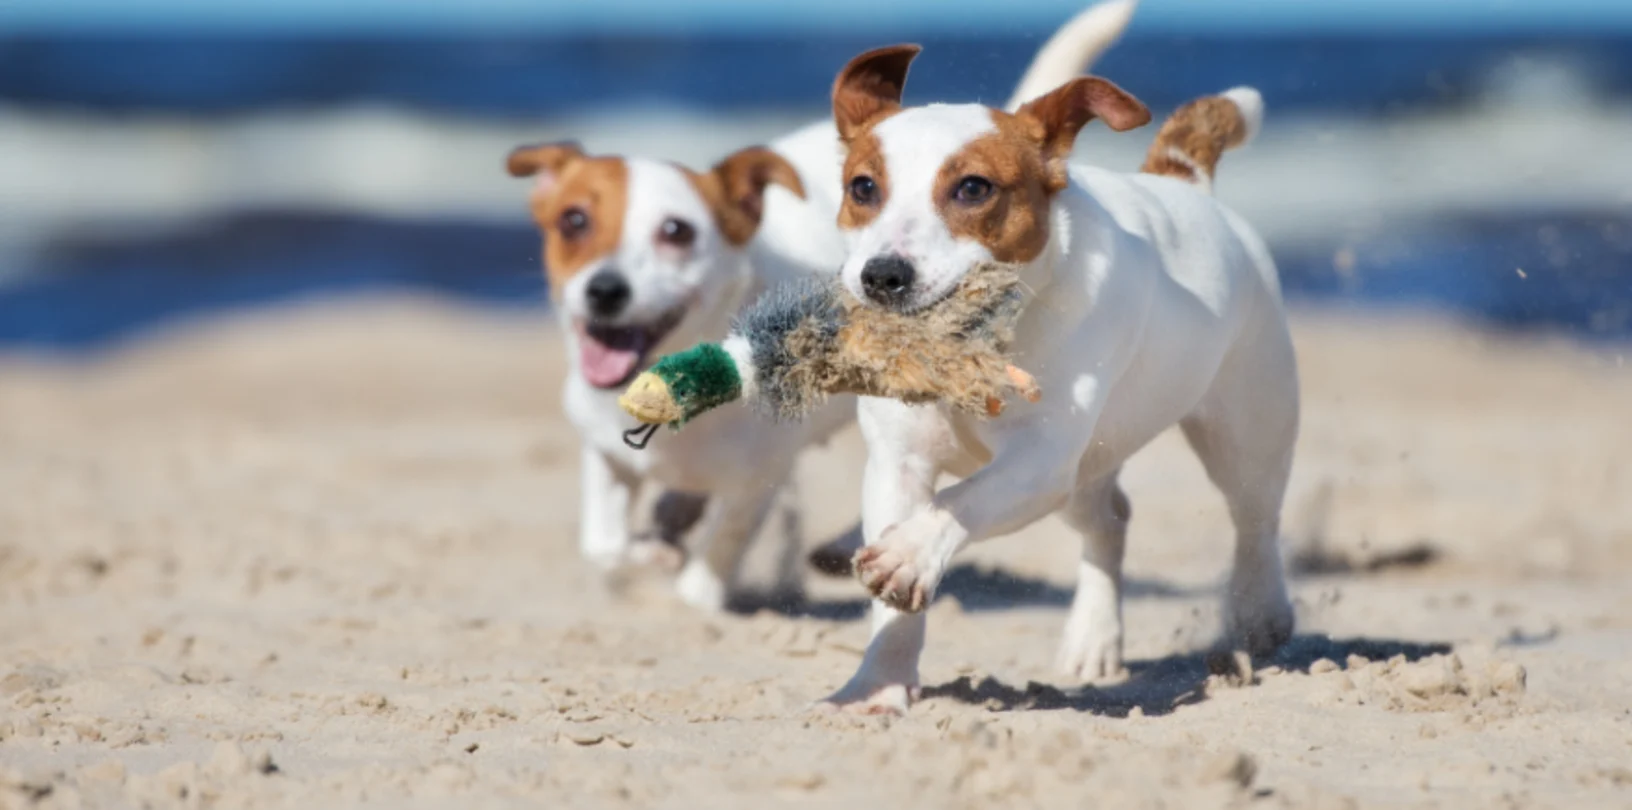 Two small dogs running on a beach, with the dog on the right carrying a toy in its mouth